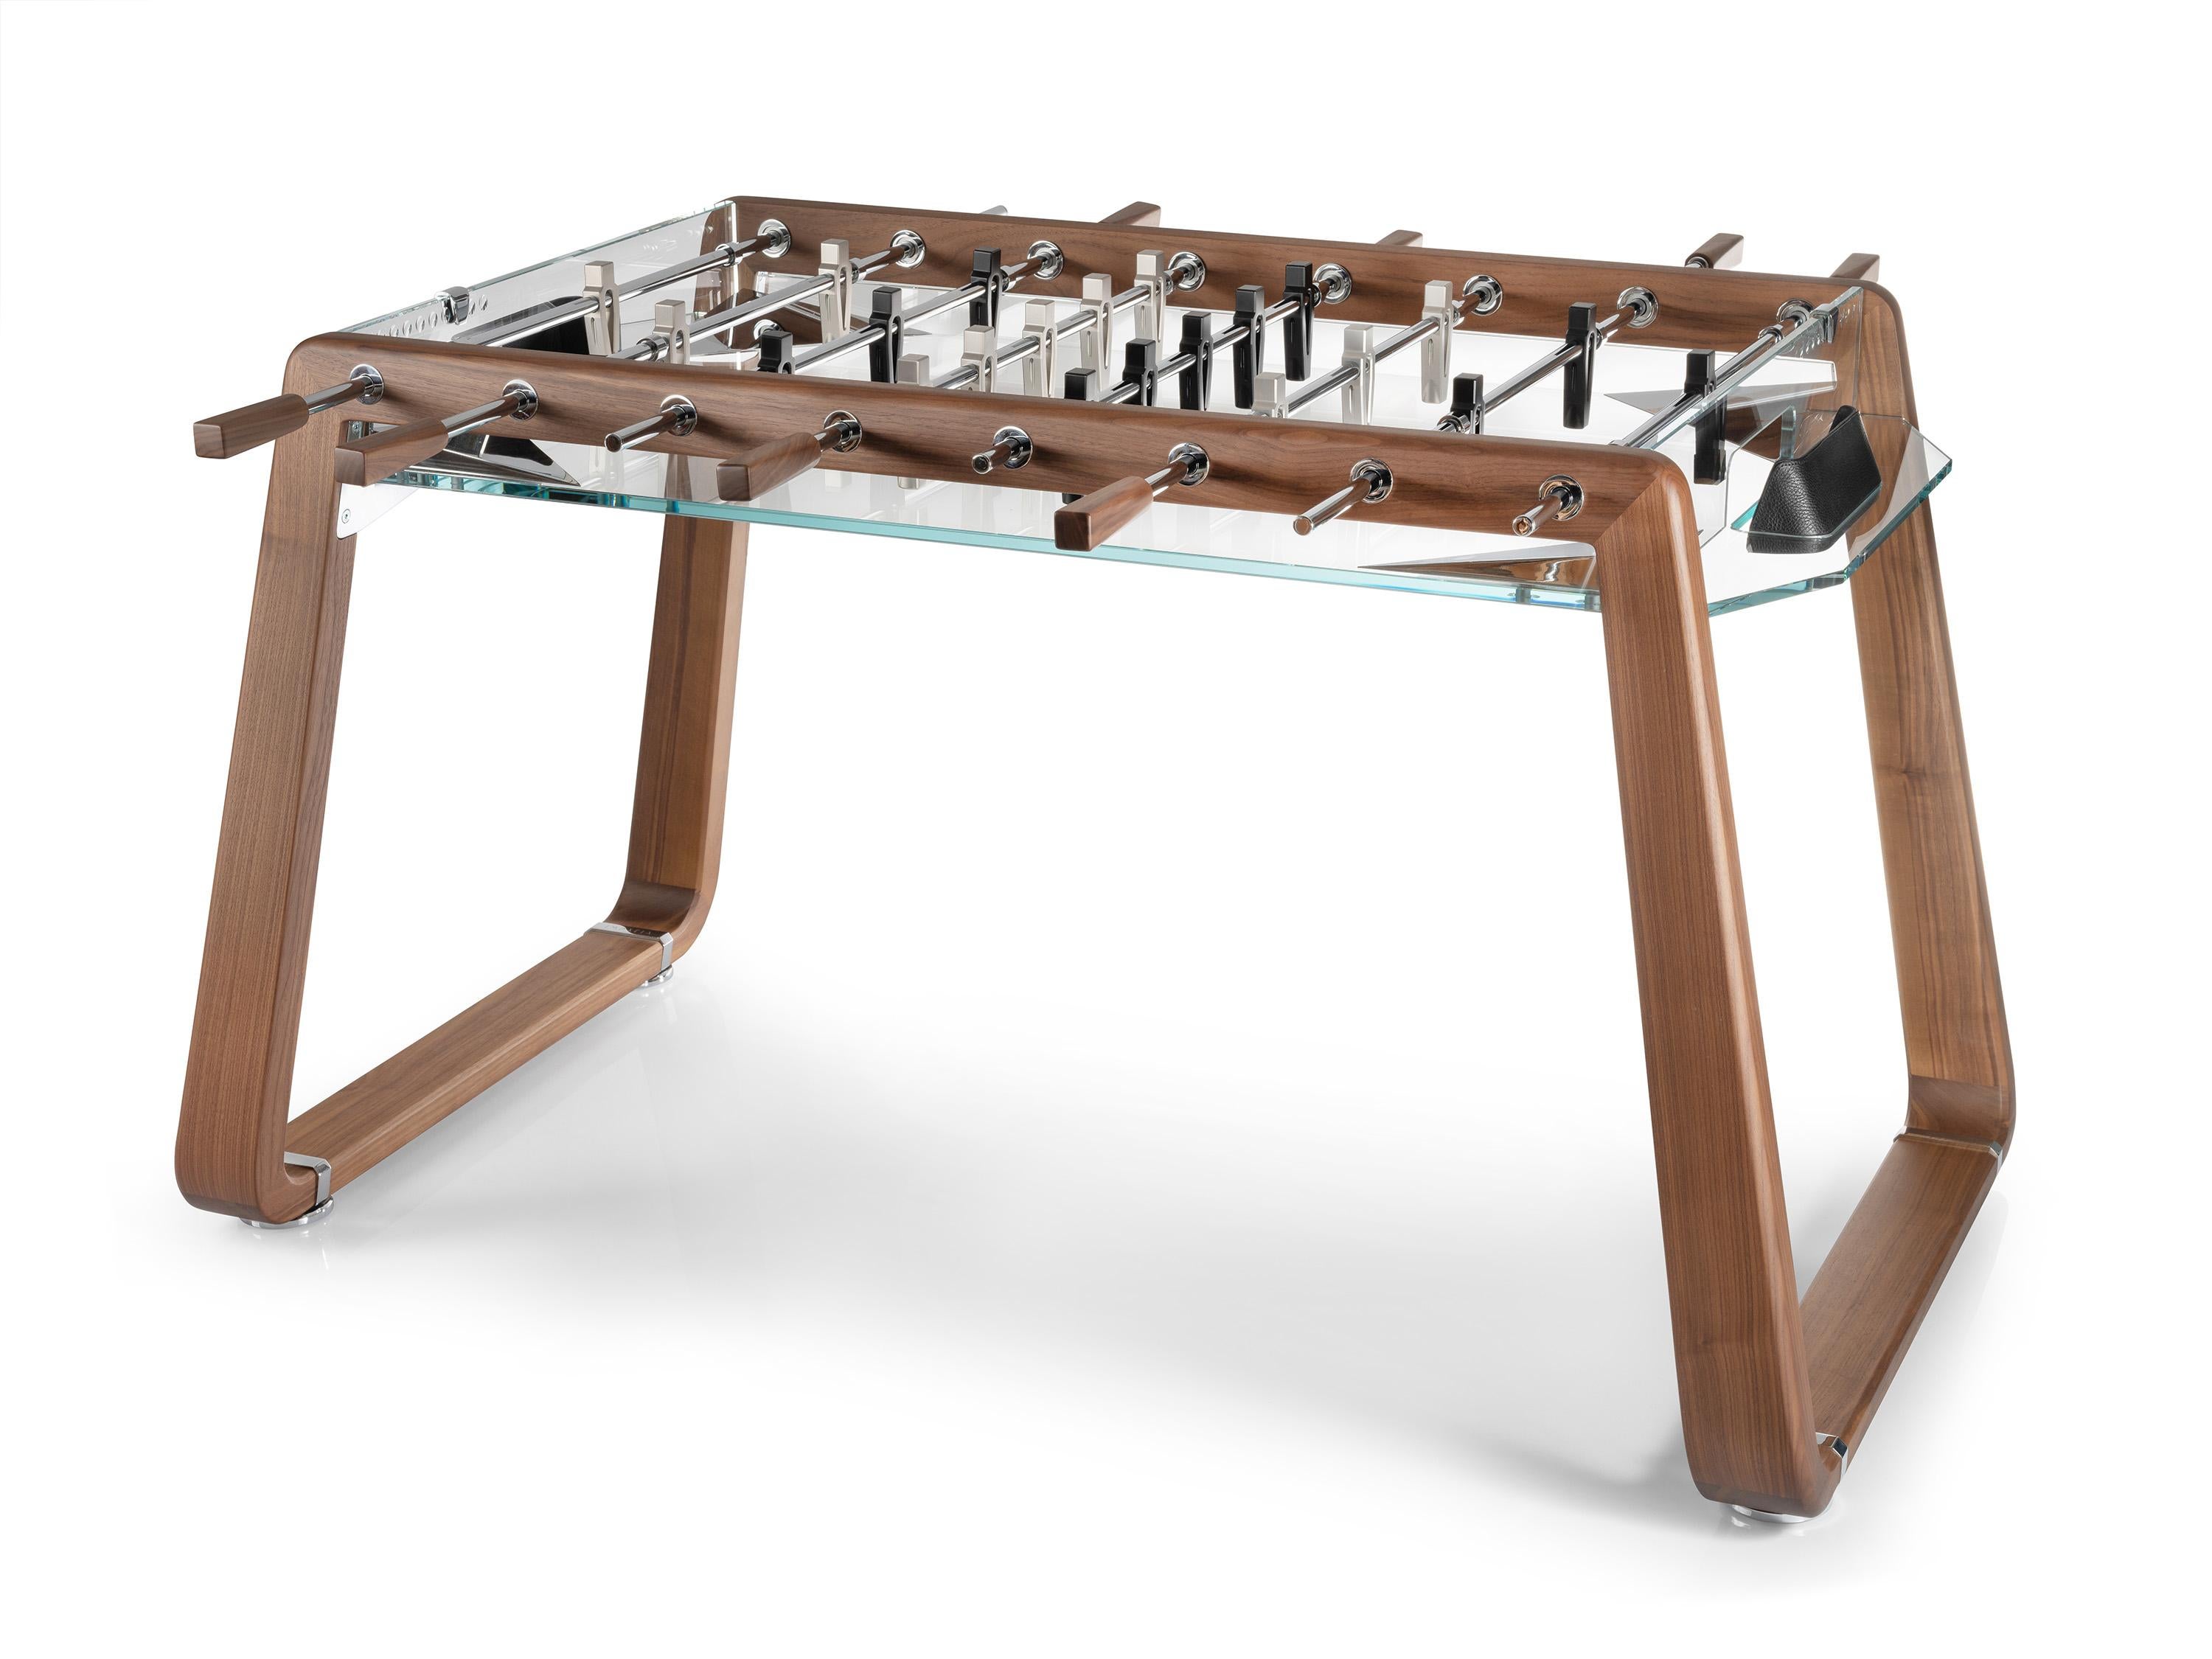 The Derby Wood is a visionary football table that pushes the boundaries of luxury design within the game table industry. Ambitiously reinterpreting the classics, this piece demonstrates the sophistication and ingenuity of Italian design and